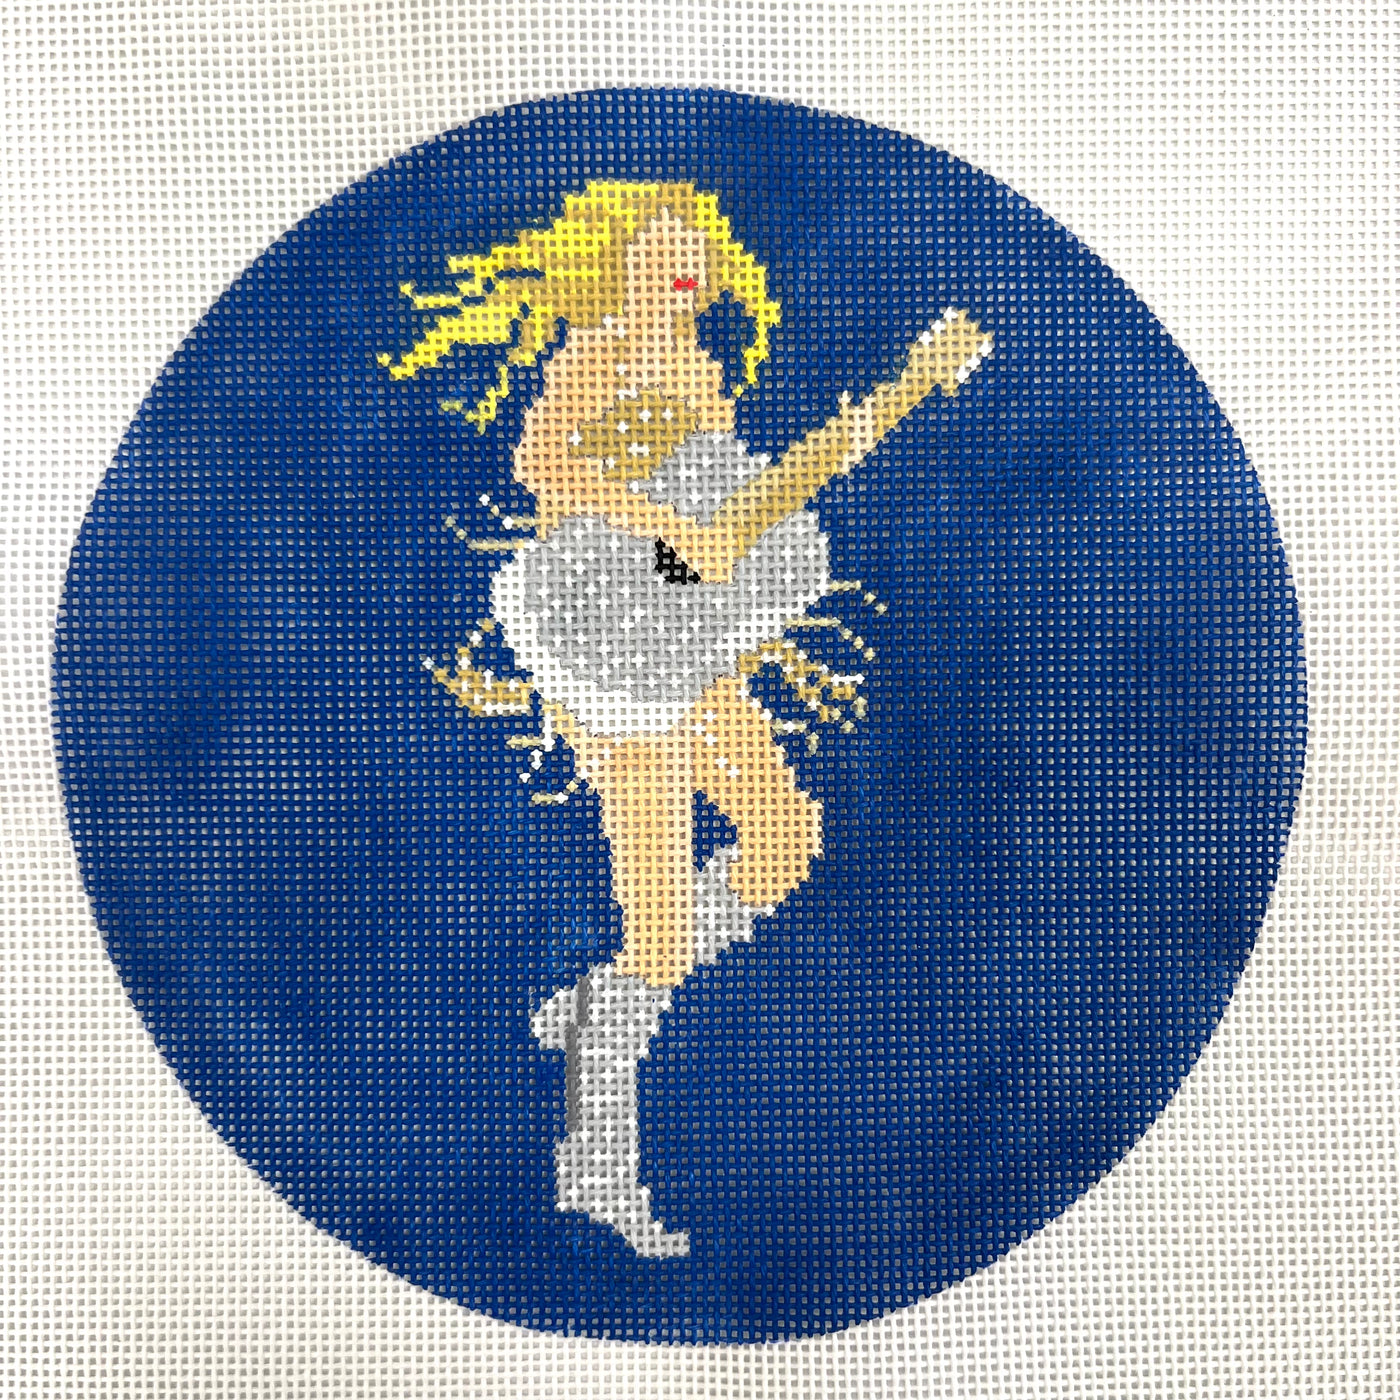 Taylor in Midnight Blue Needlepoint Canvas